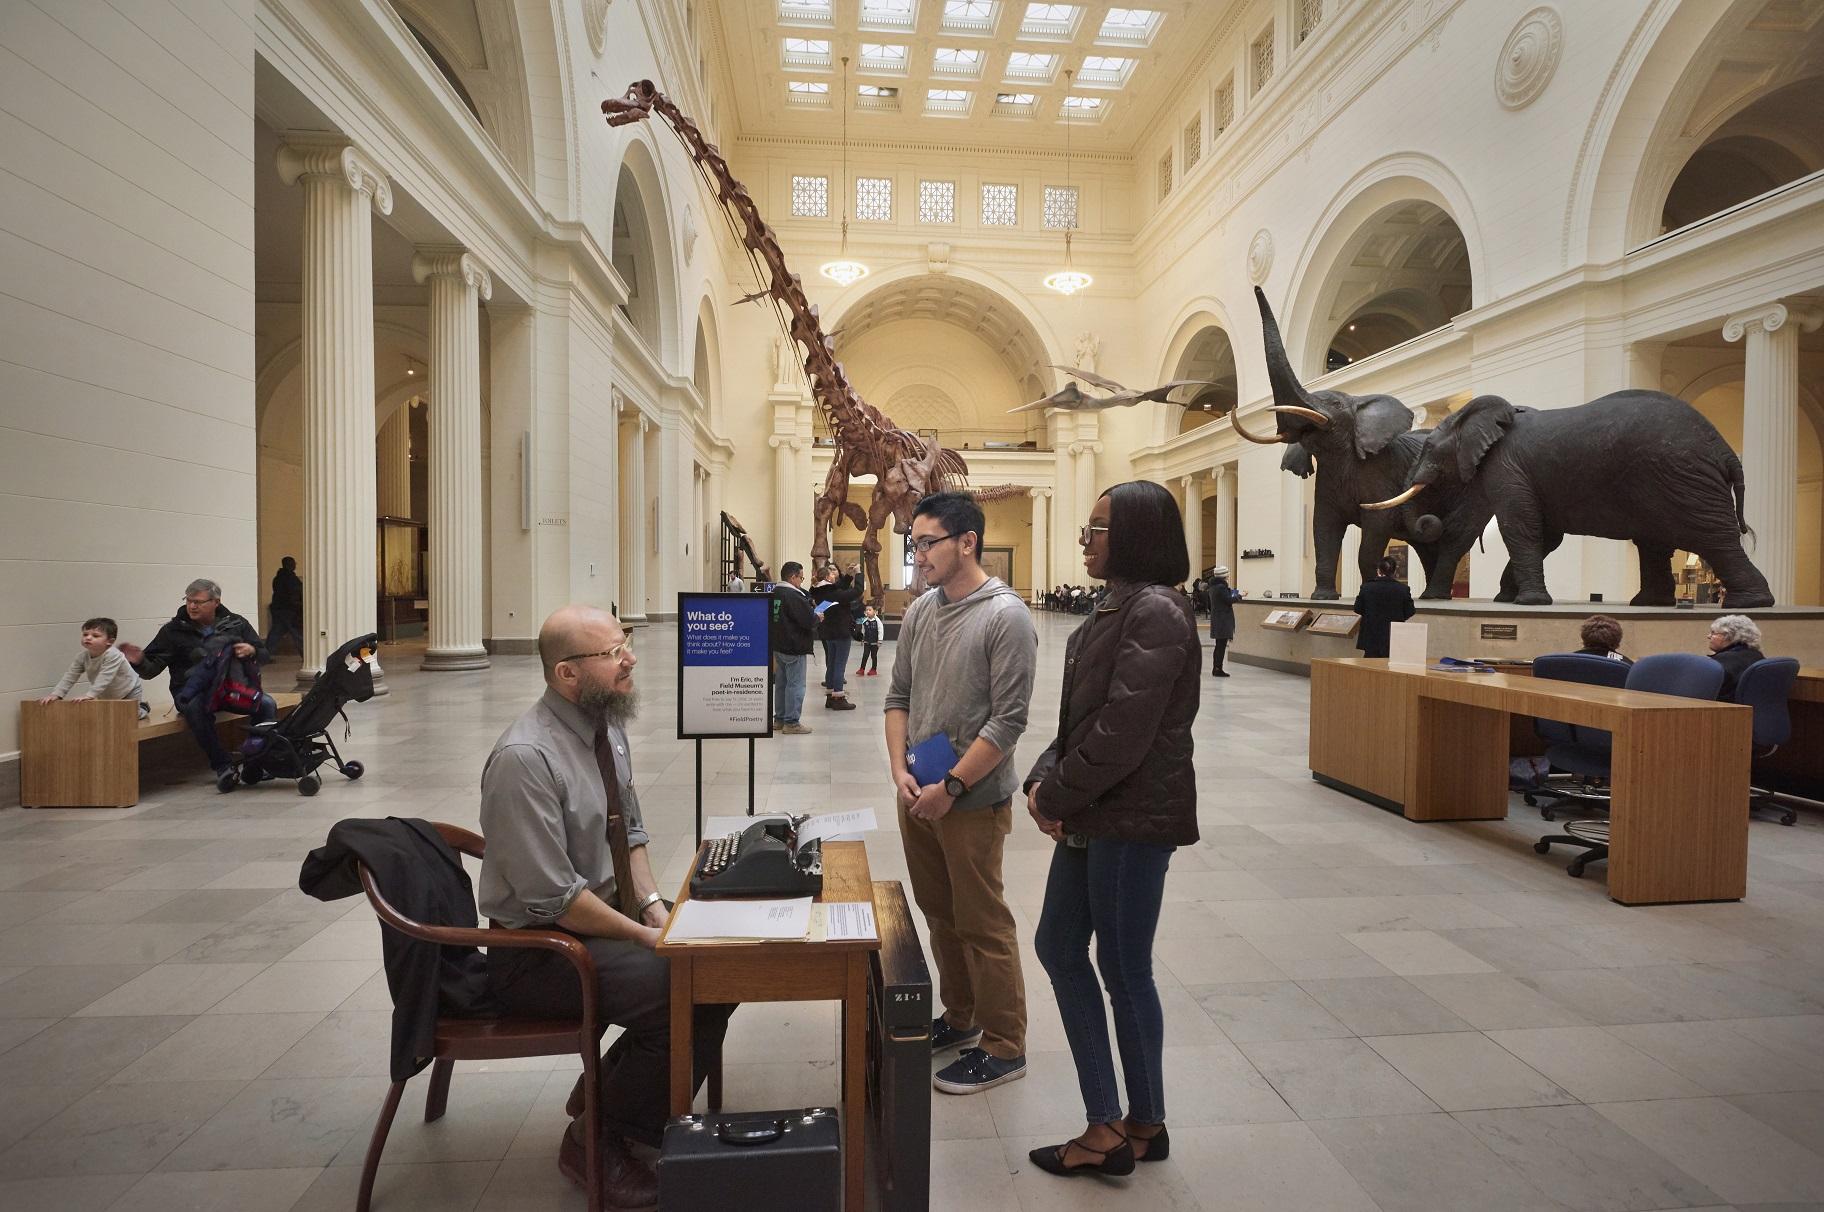 Eric Elshtain talks with visitors in the Field Museum’s Stanley Field Hall. (John Weinstein / The Field Museum)